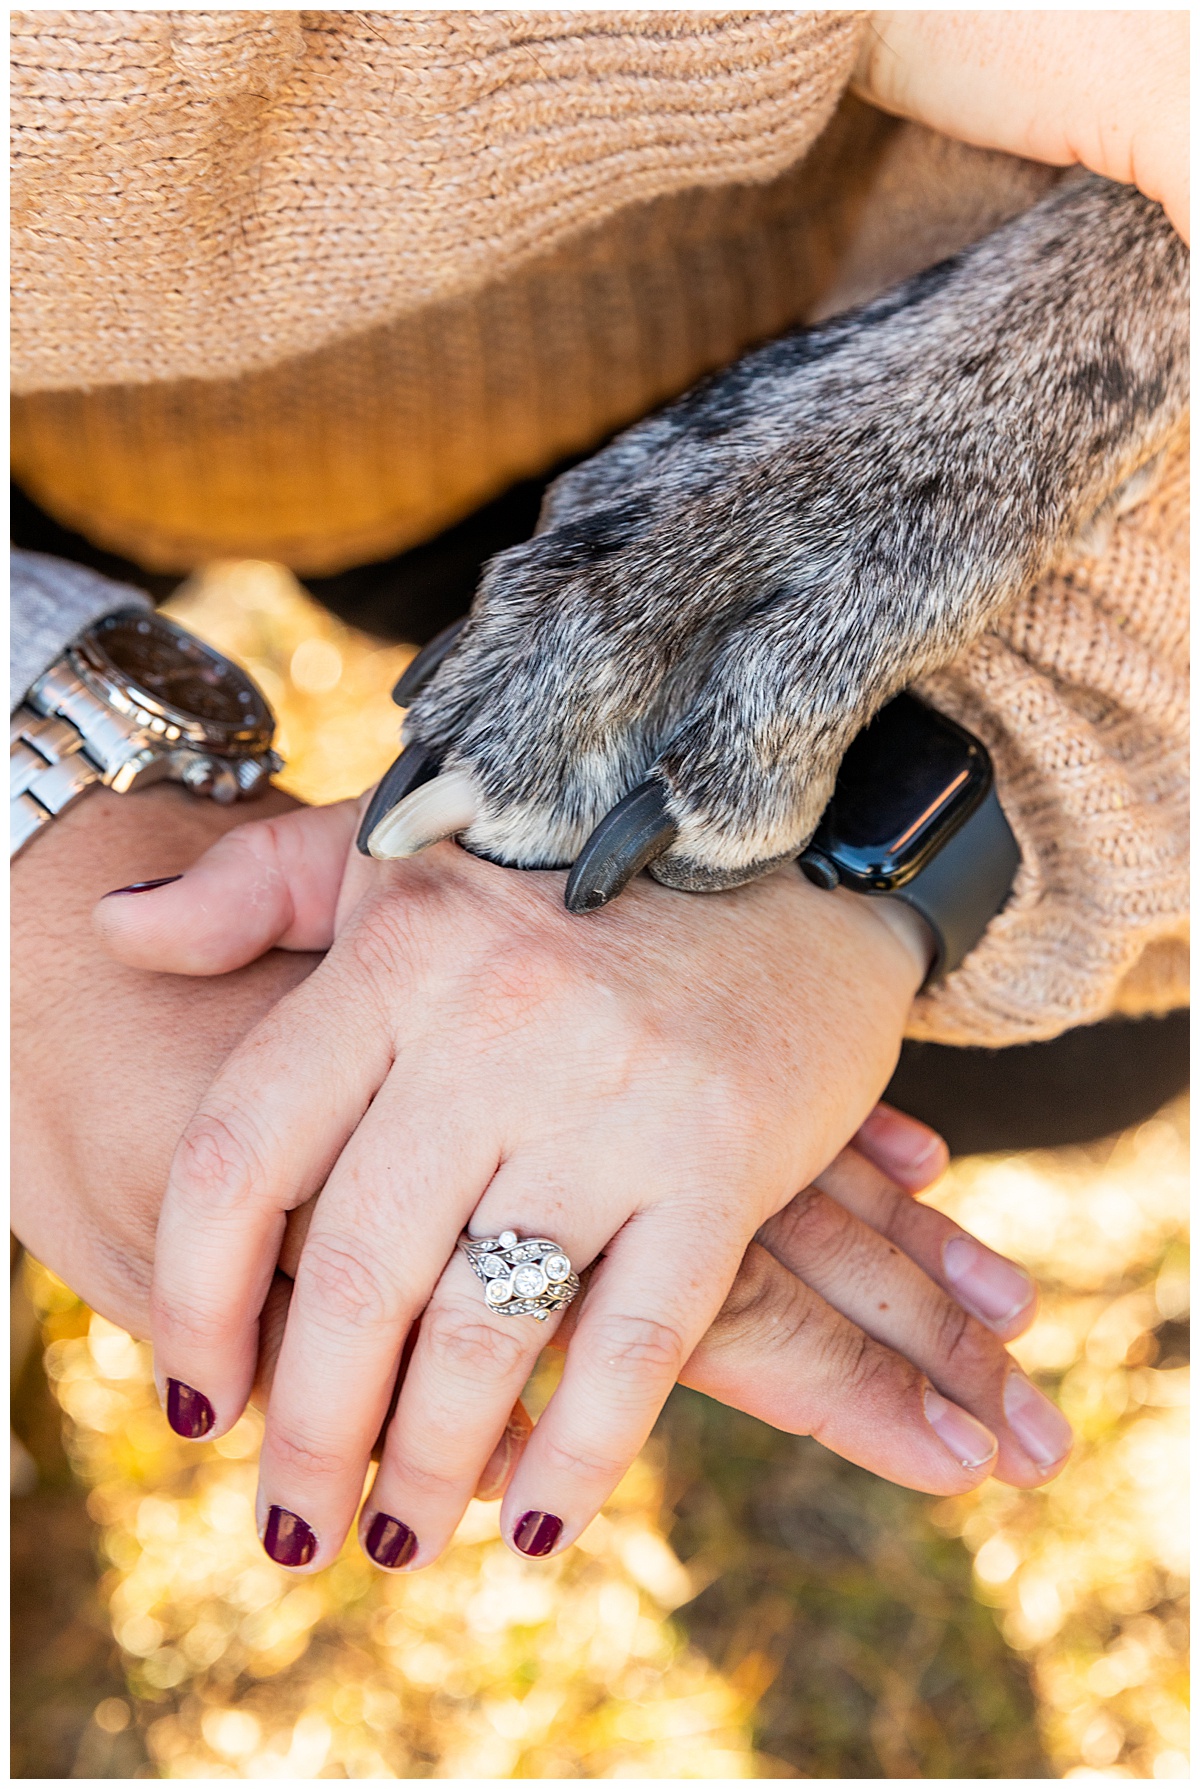 A close up of the couples hands with the great dane's paw on top of them